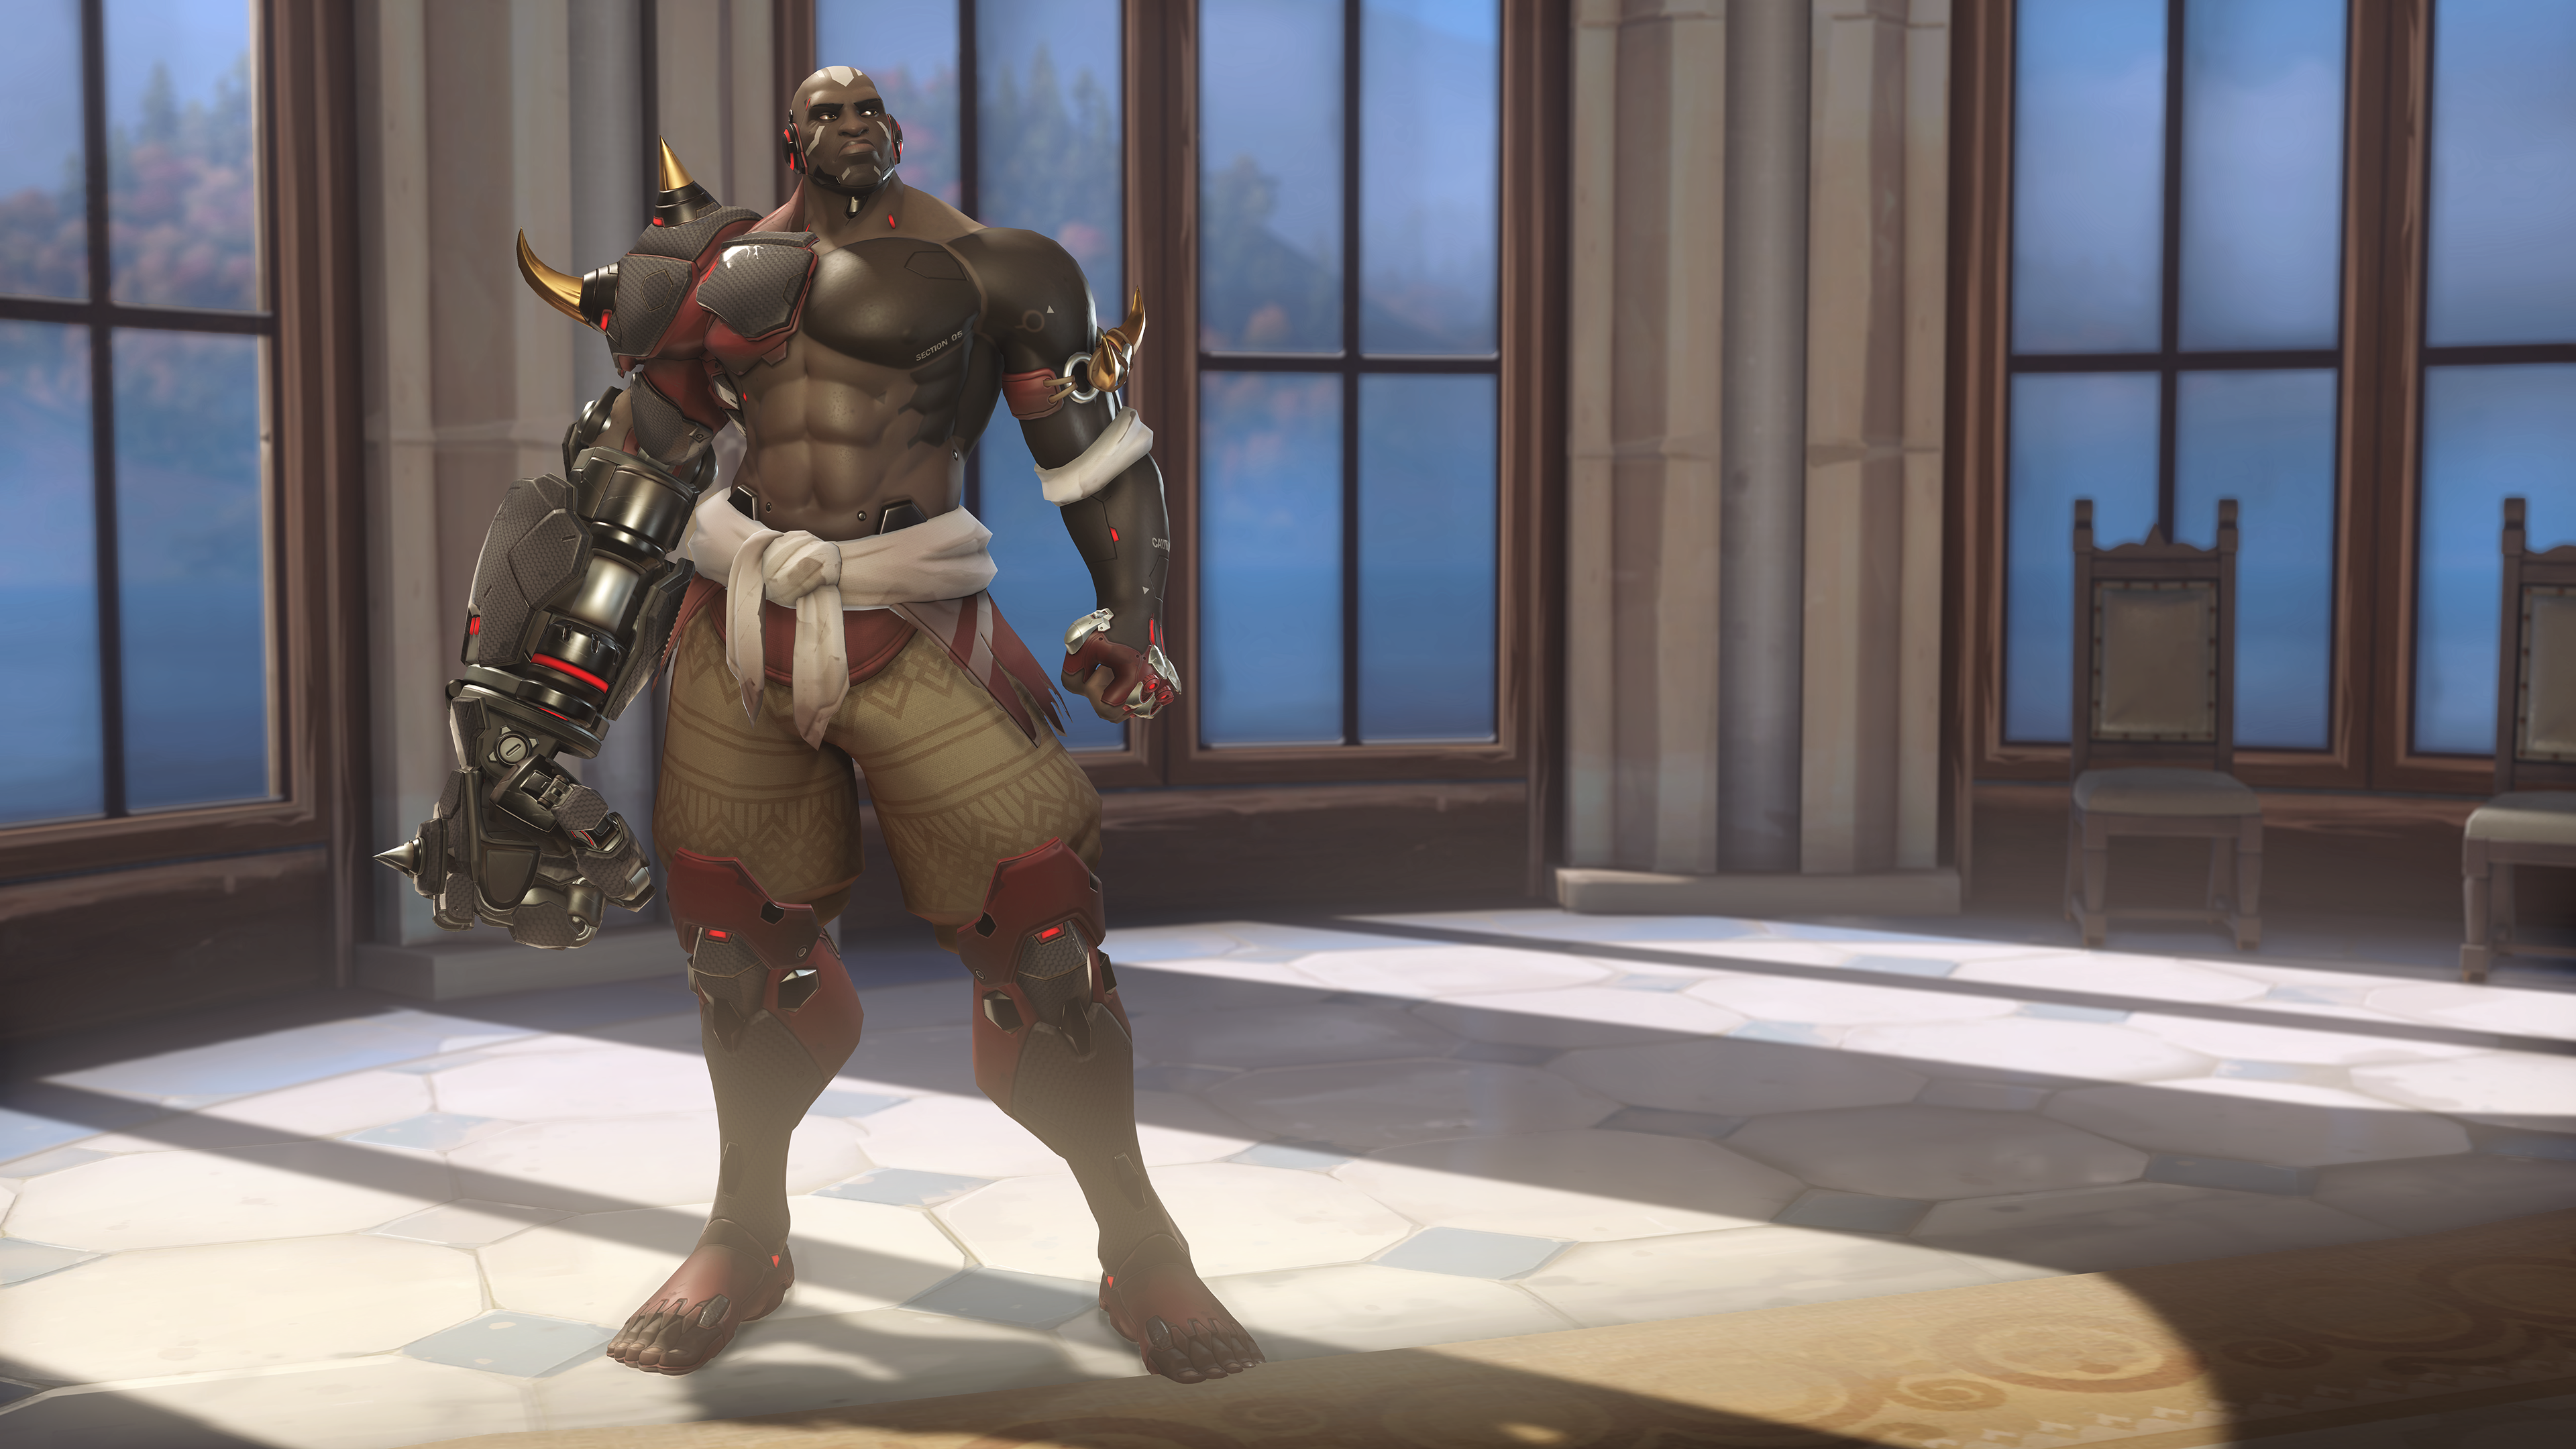 We know about Doomfist